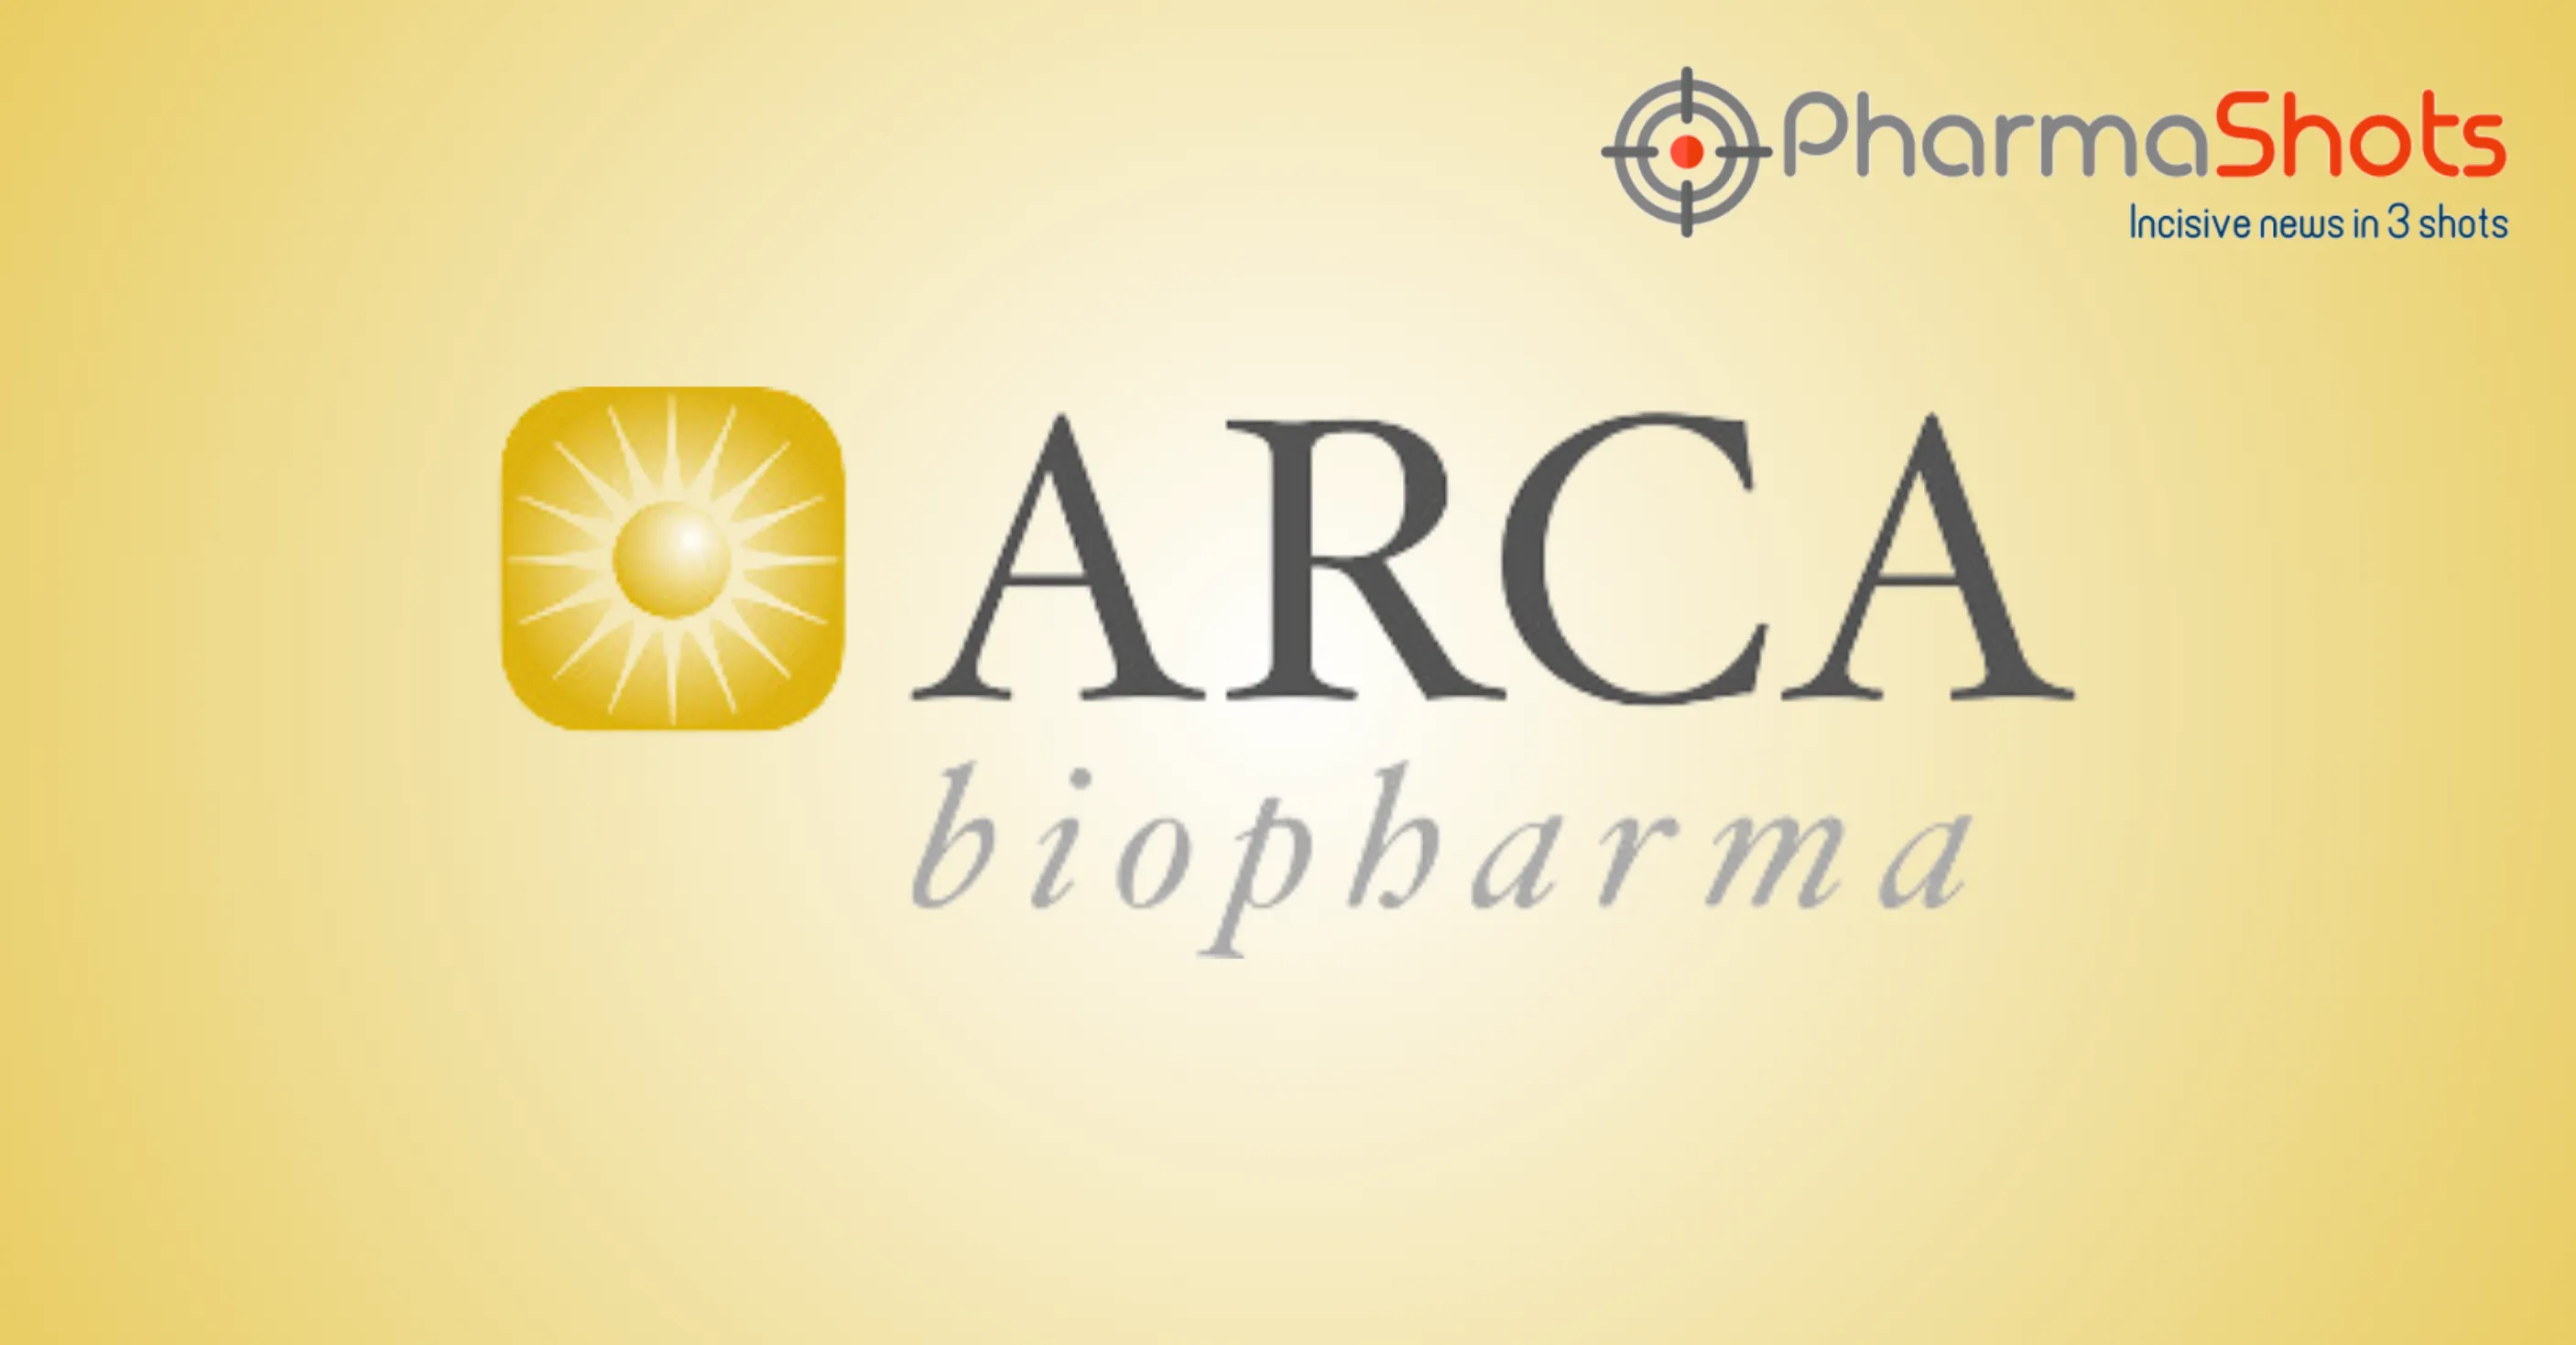 ARCA Biopharma Signs a Definitive Merger Agreement with Oruka Therapeutics to Develop Biologics for Chronic Skin Diseases